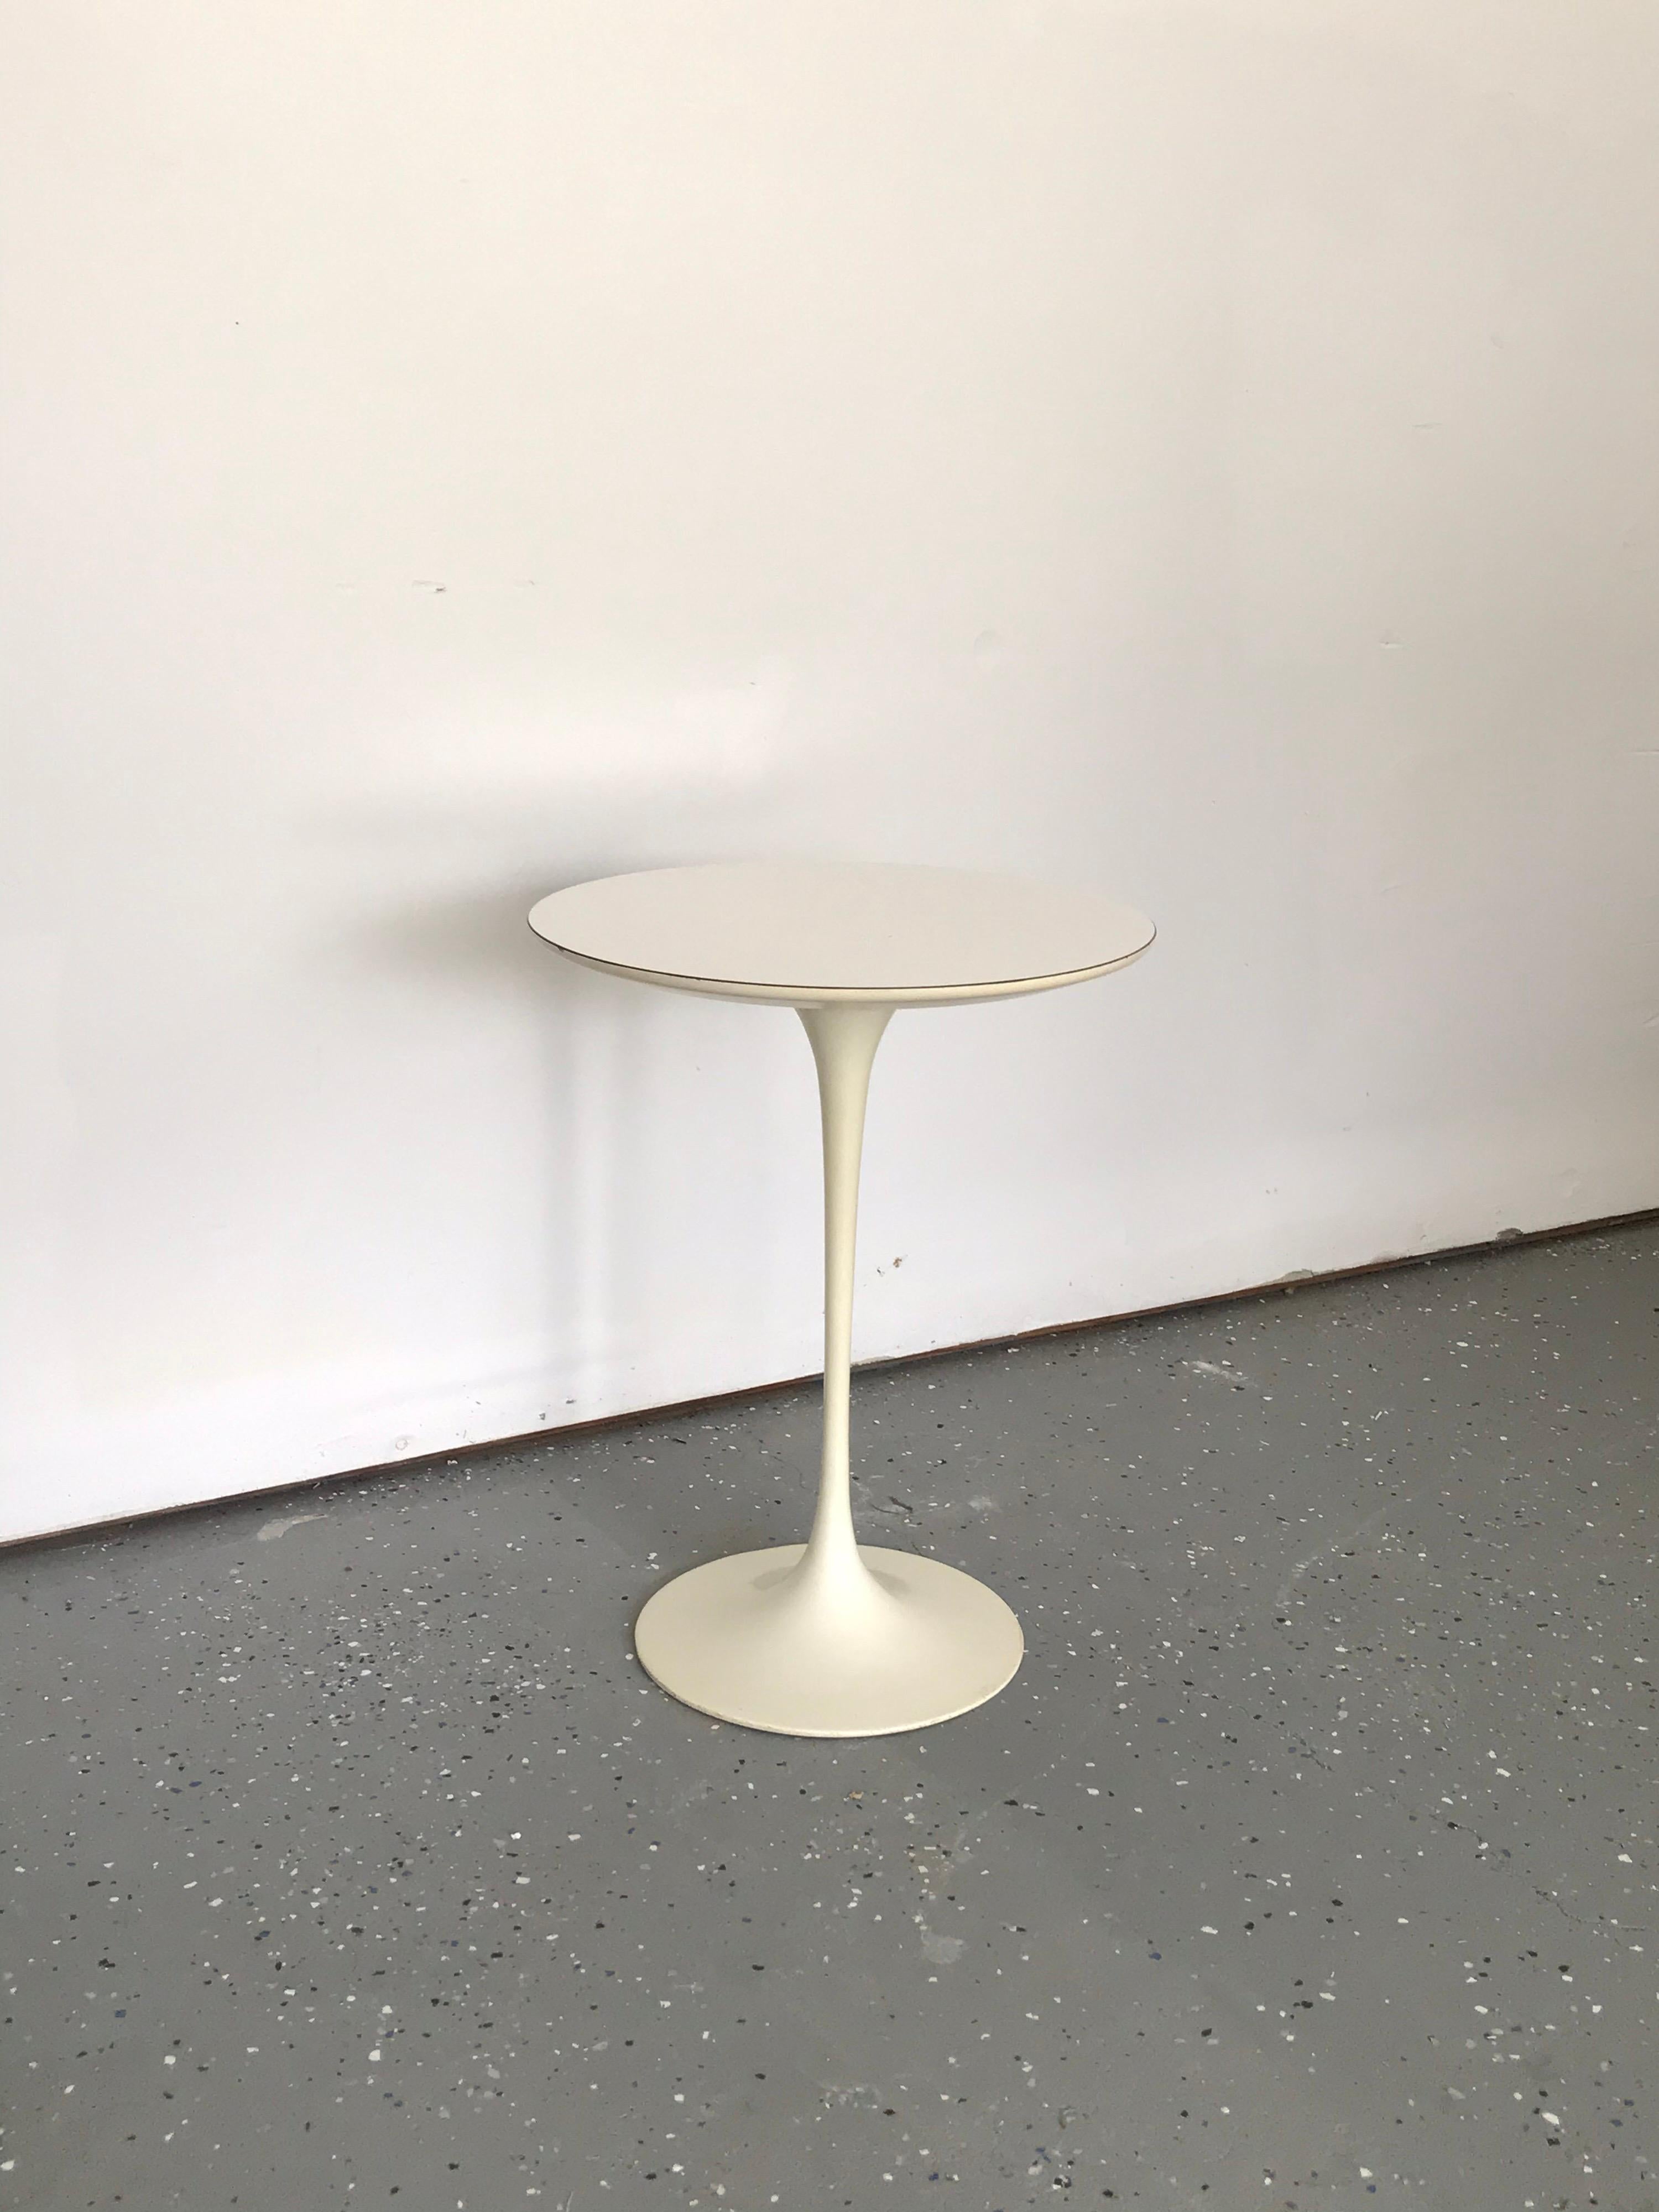 Fantastic and early example of an Eero Saarinen side table. Heavy iron base supports a white laminate top. Very very good vintage condition including an exceptionally clean tag.